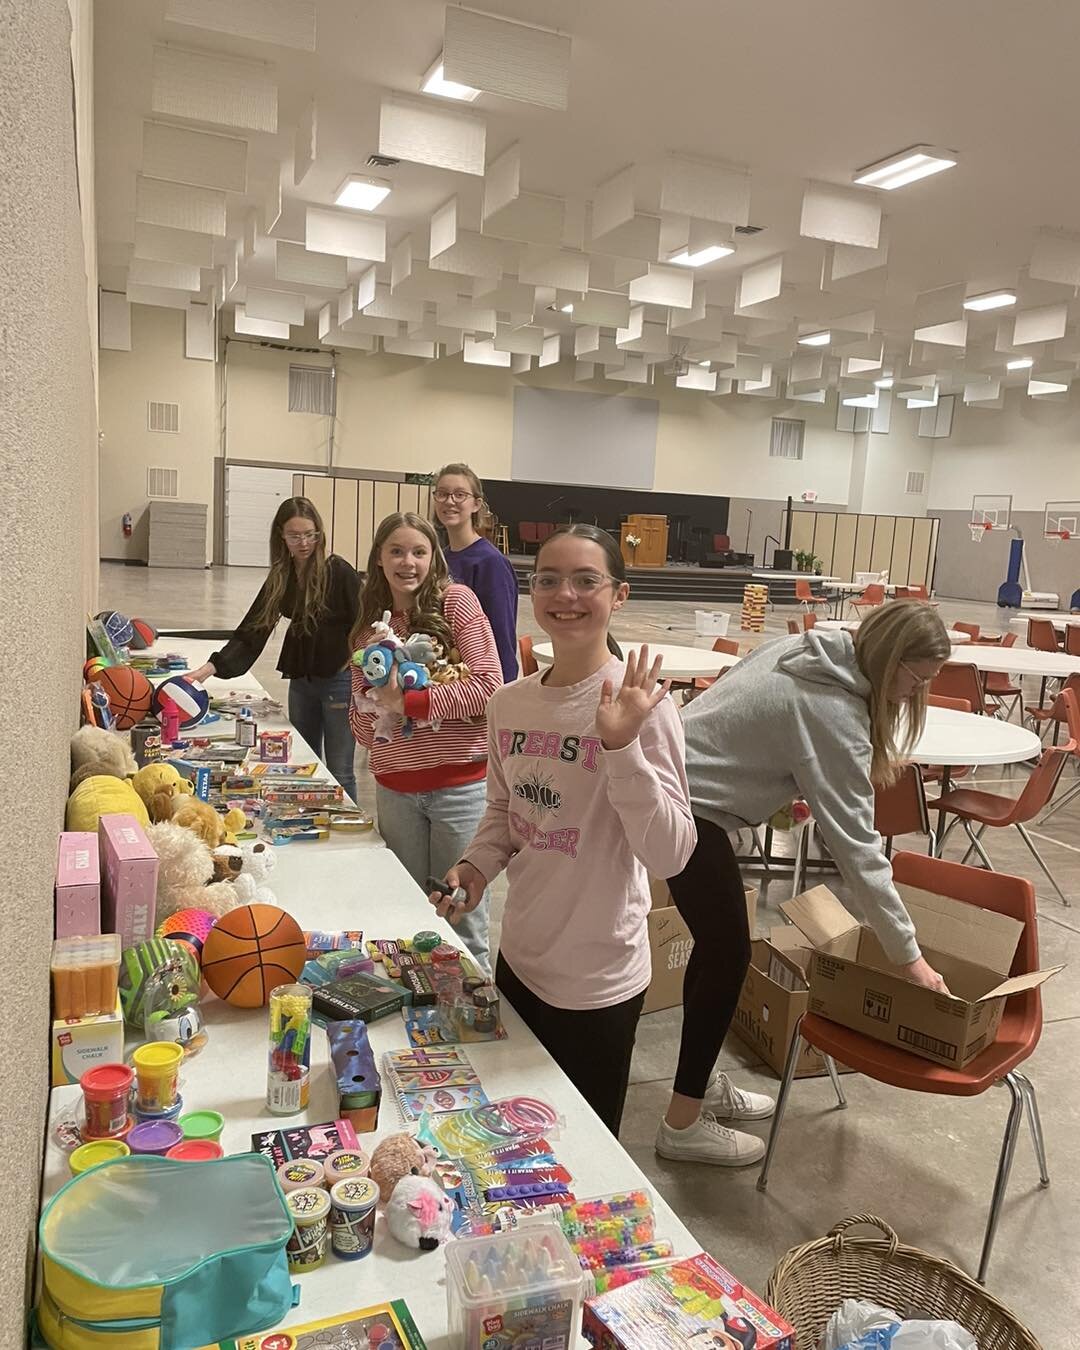 Many thanks to those who stopped by Sunday evening to help setup for the AWANA Carnival, including our youth group who gave up their usual game + open gym time to help serve!